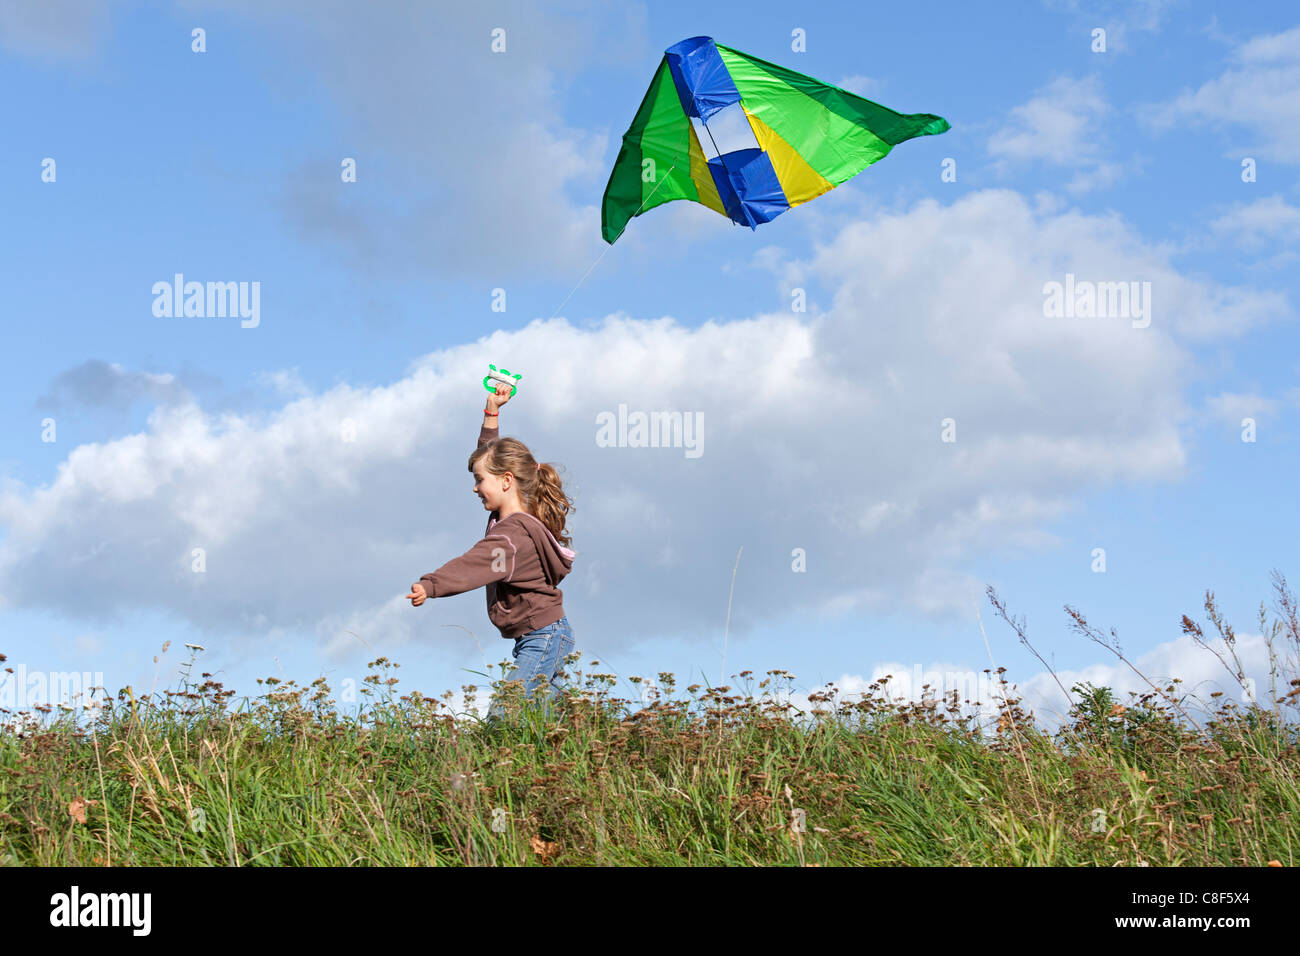 young girl flying a kite Stock Photo